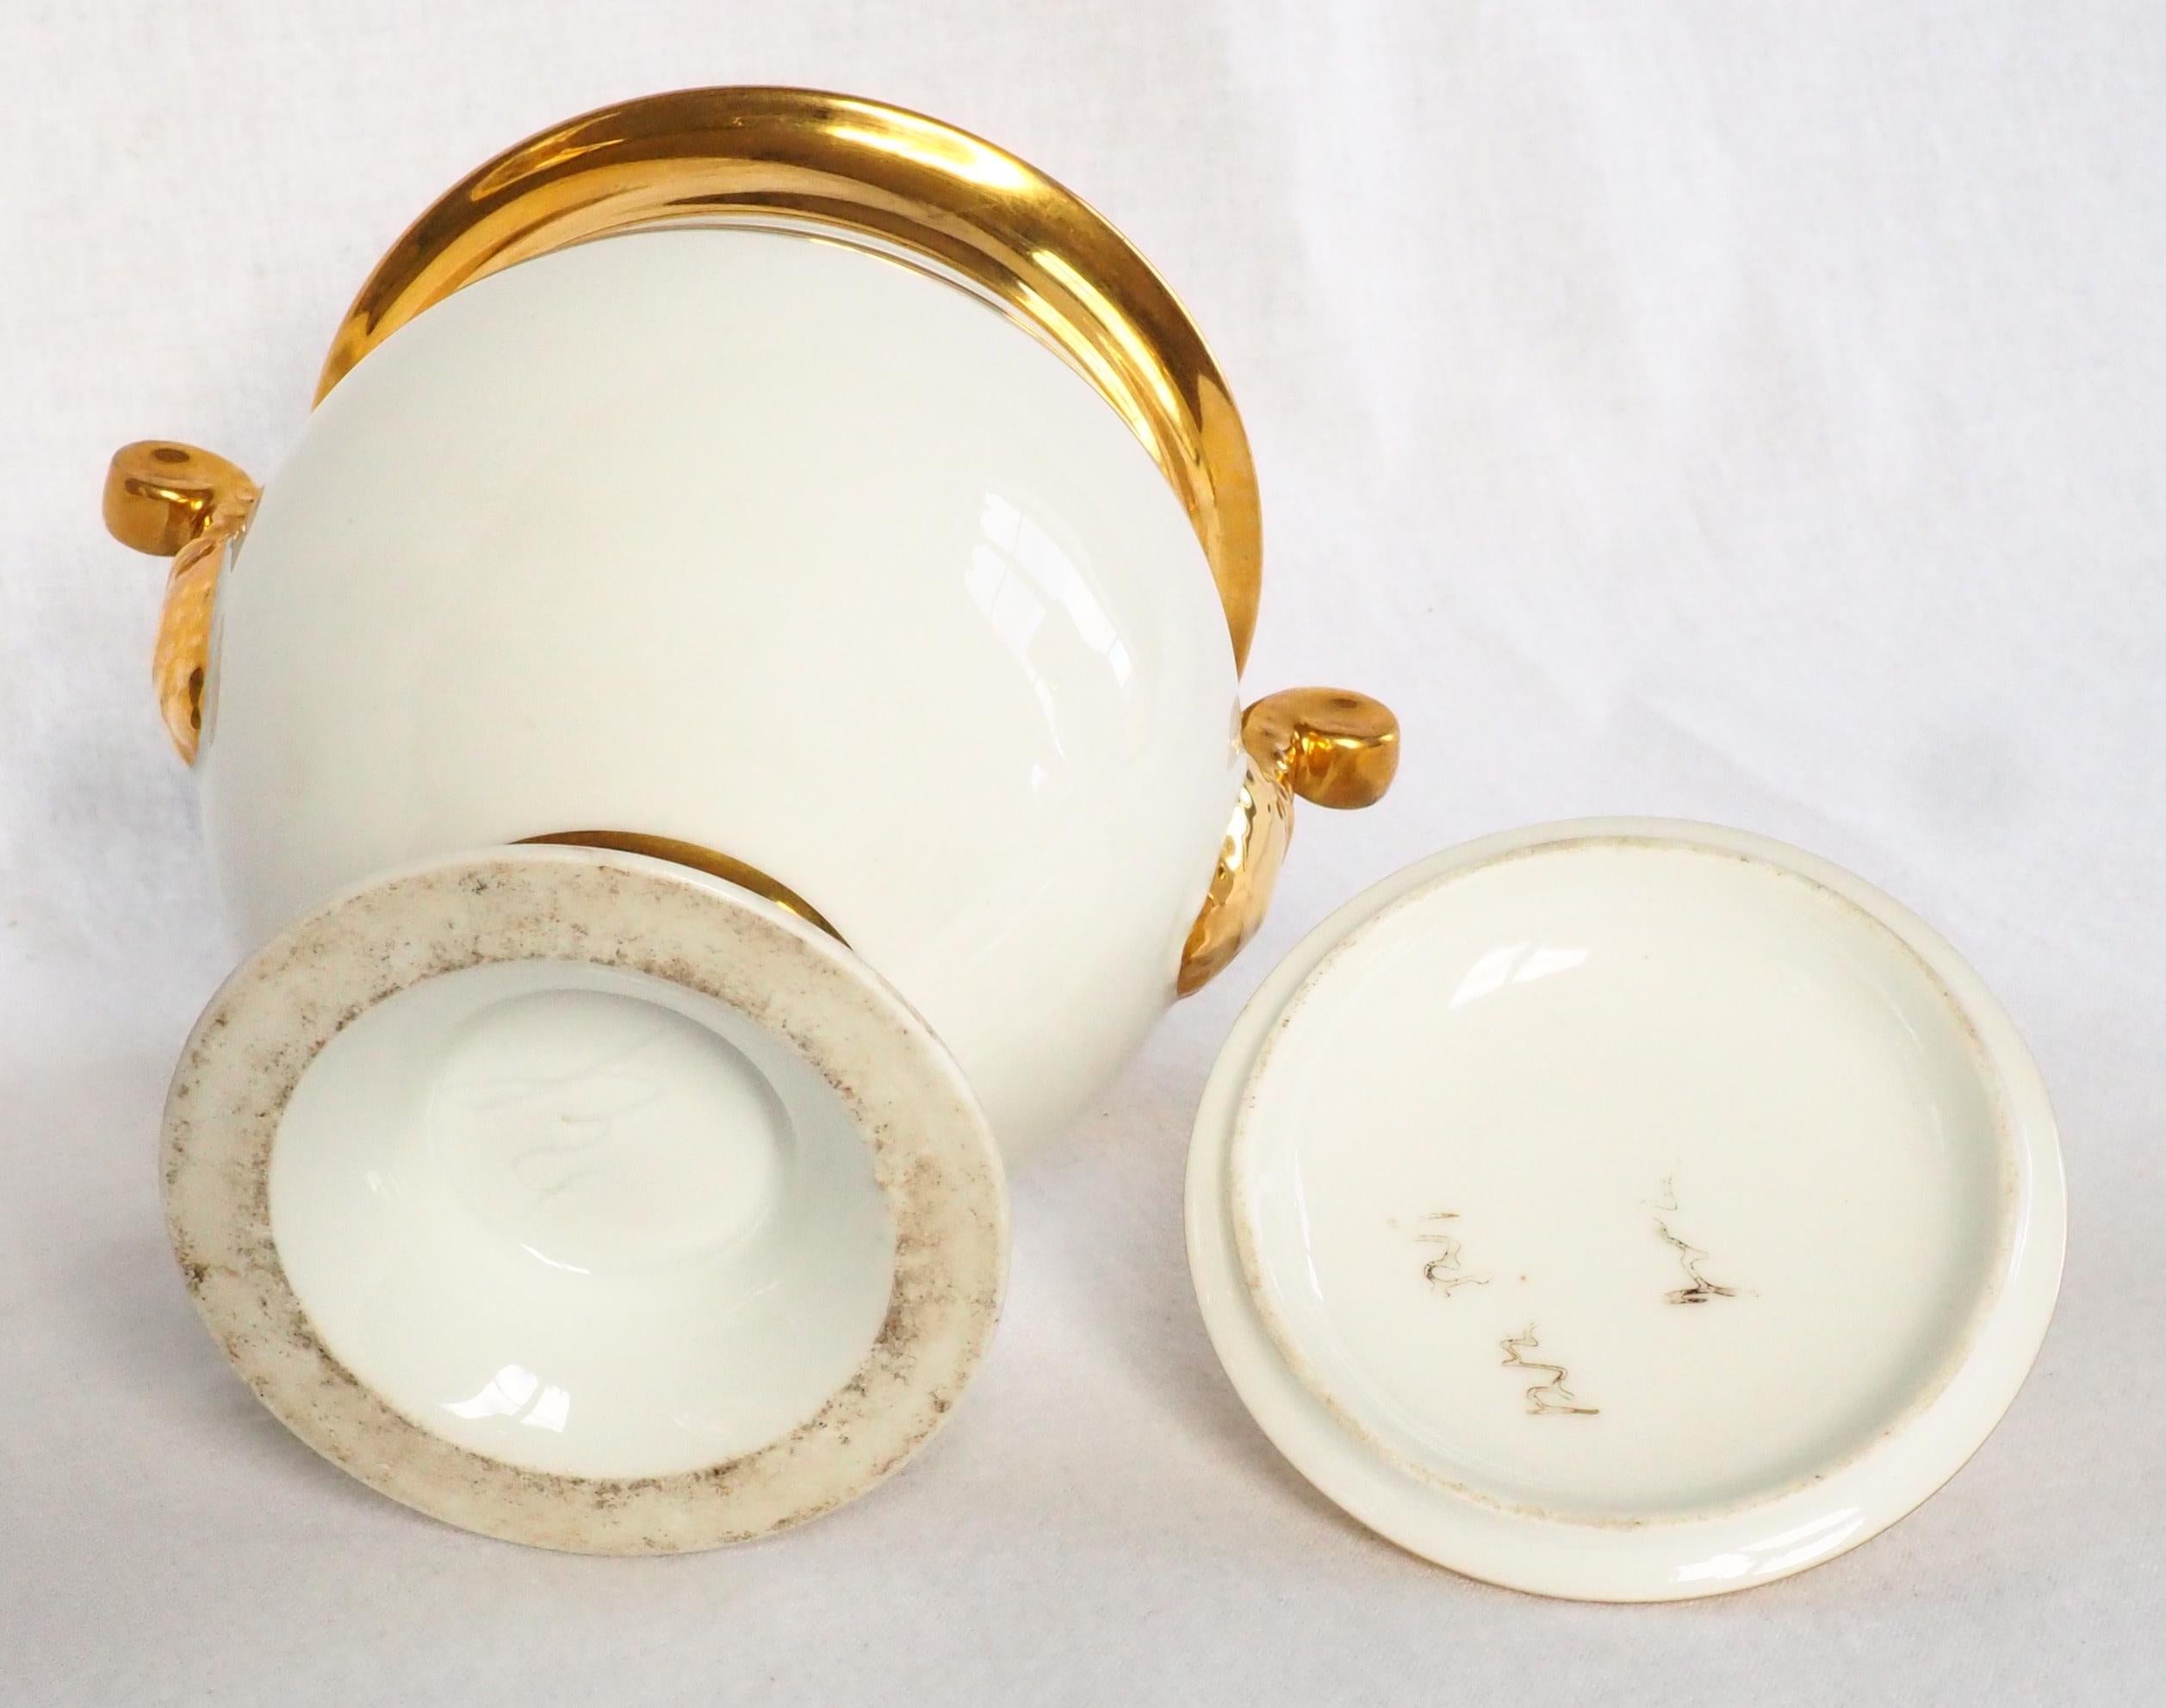 Antique French Empire Paris porcelain serving coffee set - early 19th century For Sale 8